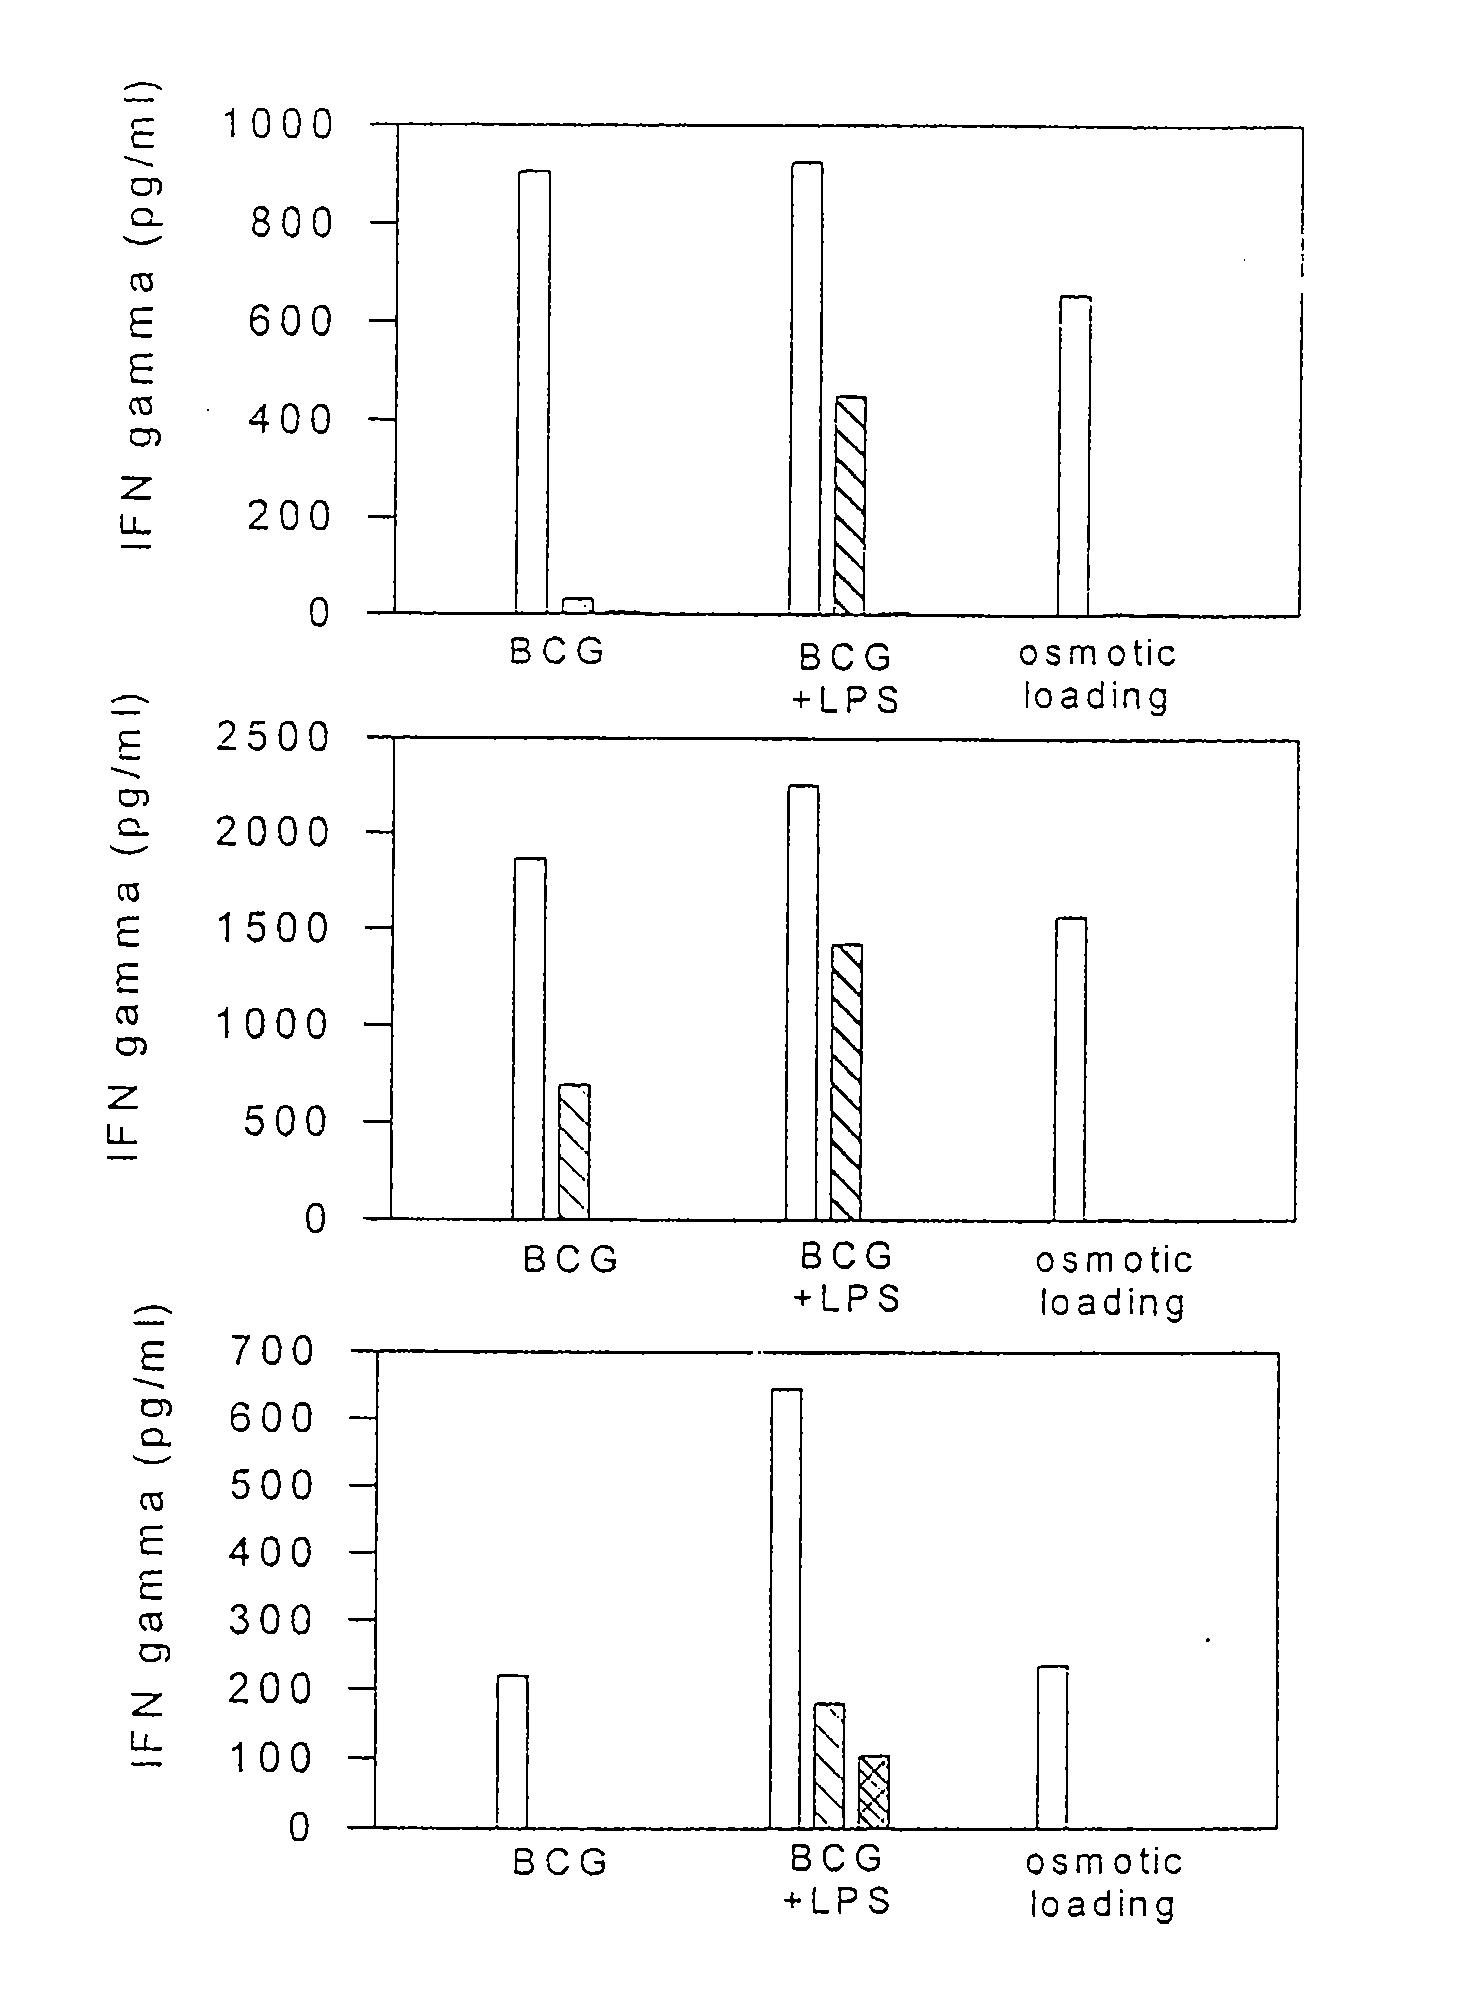 Method to increase class i presentation of exogenous antigens by human dendritic cells